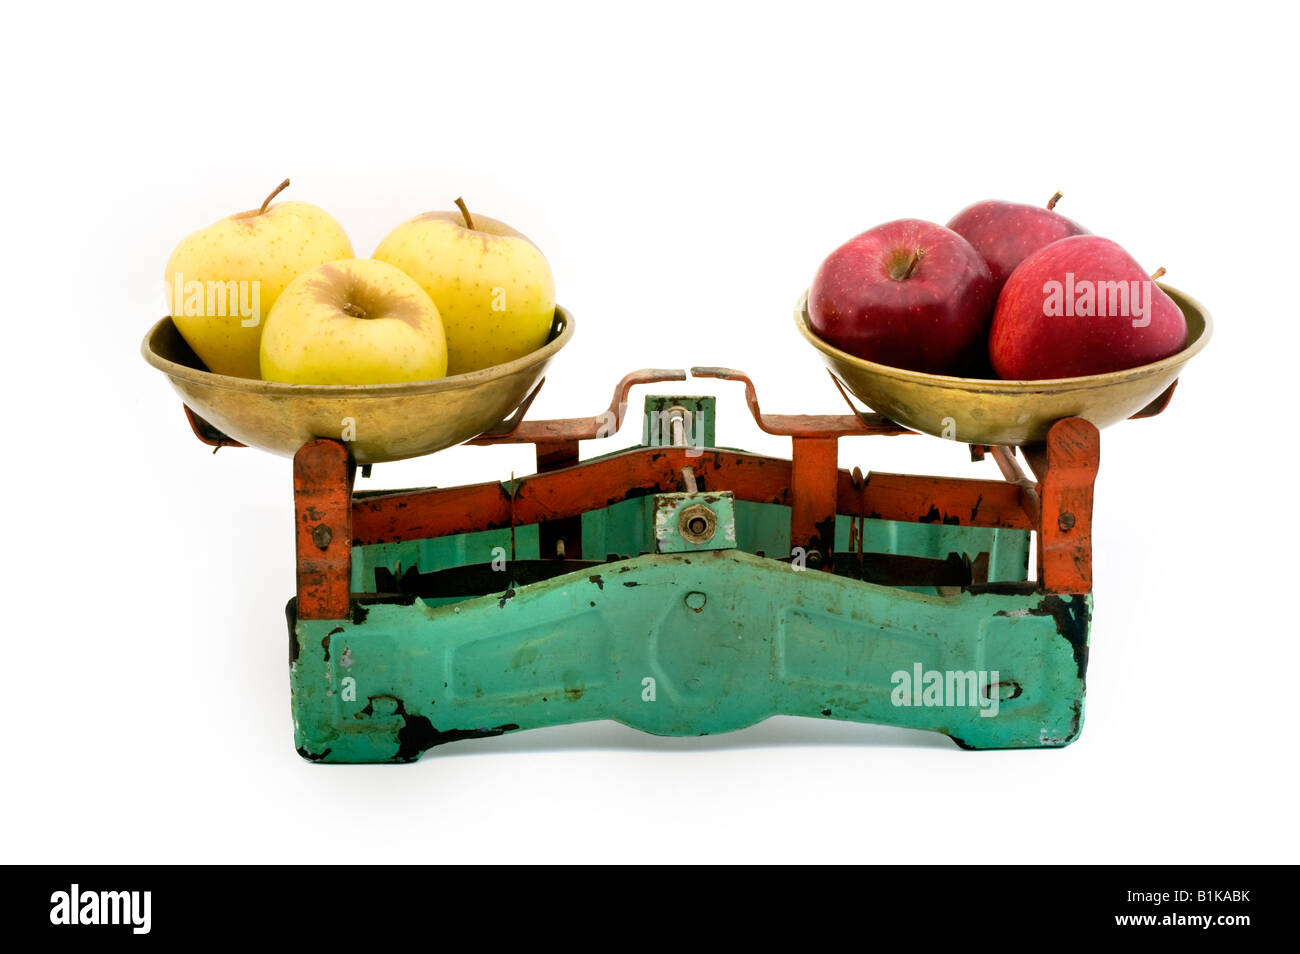 https://c8.alamy.com/comp/B1KABK/old-scales-with-yellow-and-red-apples-isolated-on-white-B1KABK.jpg